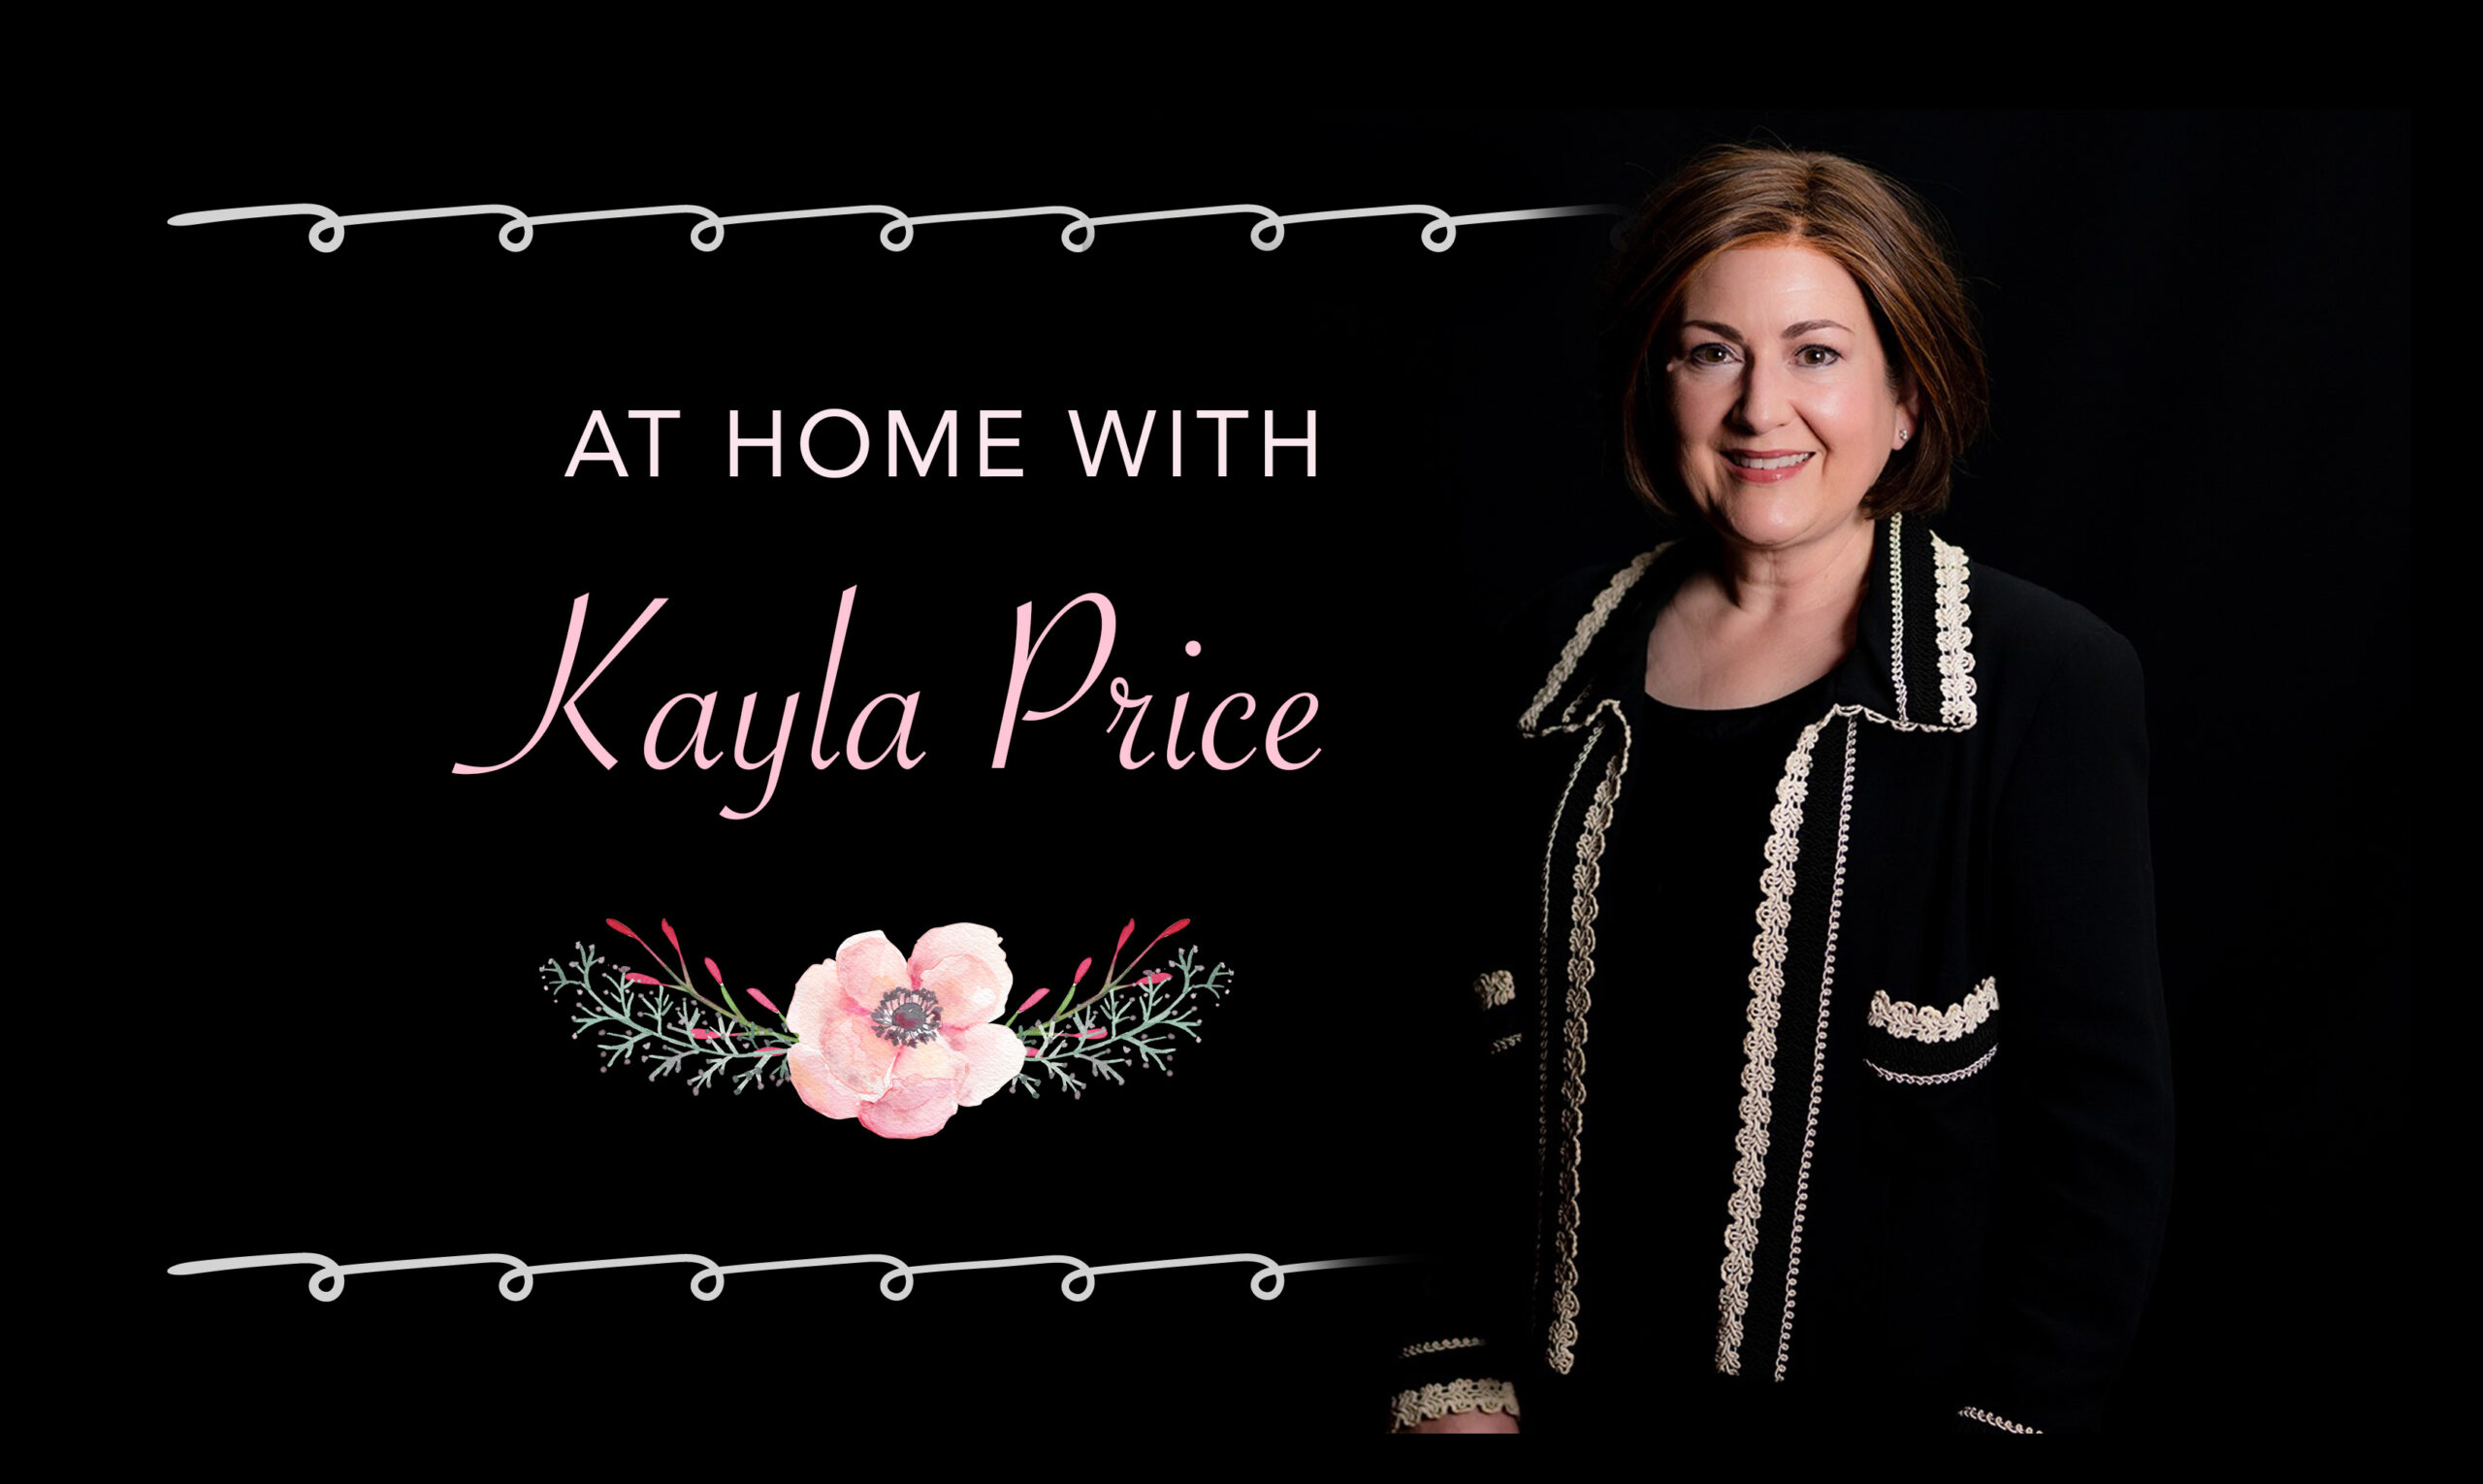 AT HOME WITH KAYLA PRICE 2/18